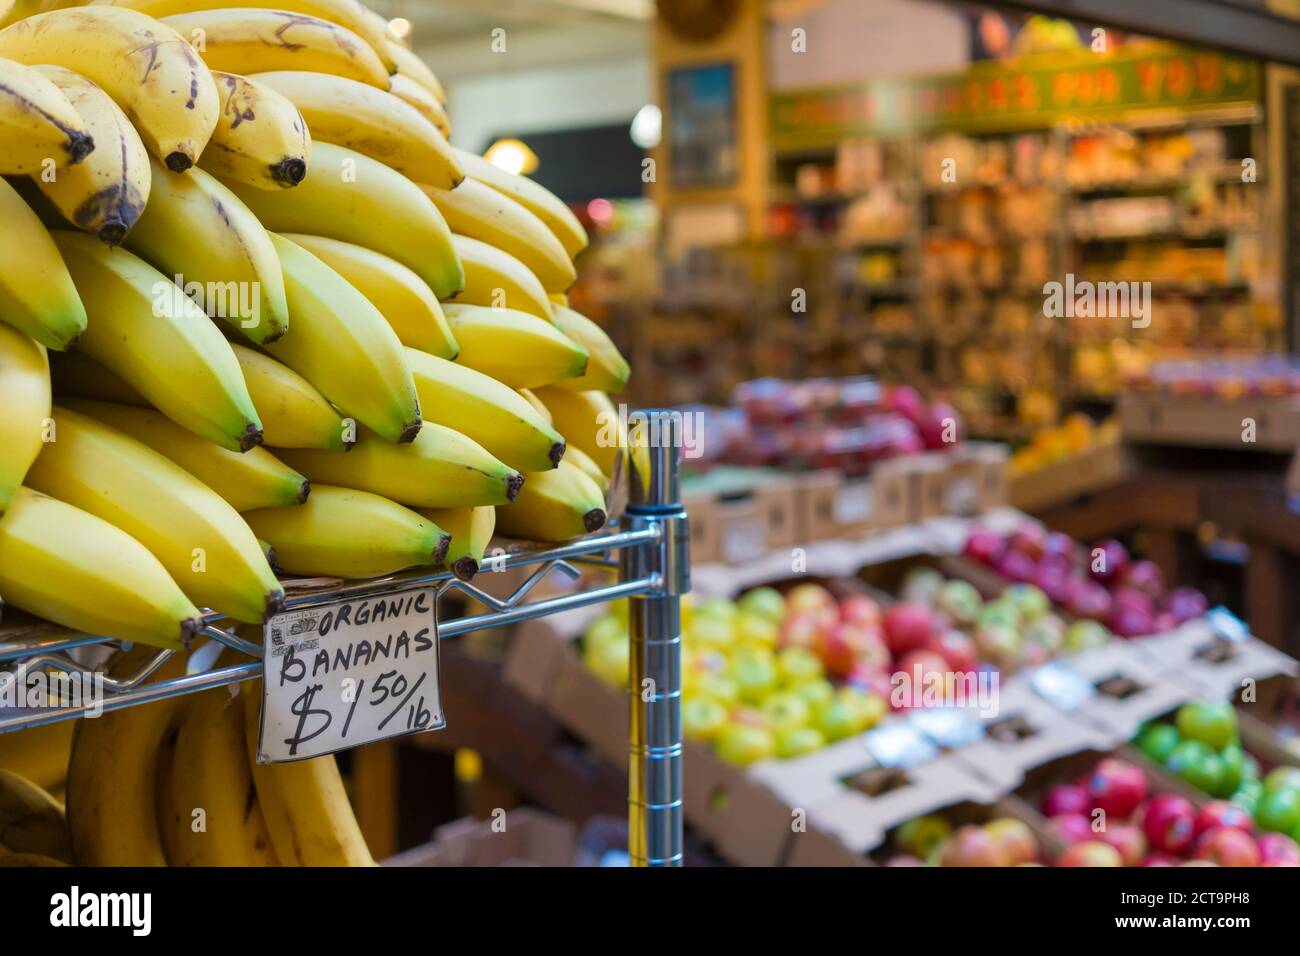 USA, California, San Francisco, Organic fruit and vegetable with bananas close up in a store Stock Photo